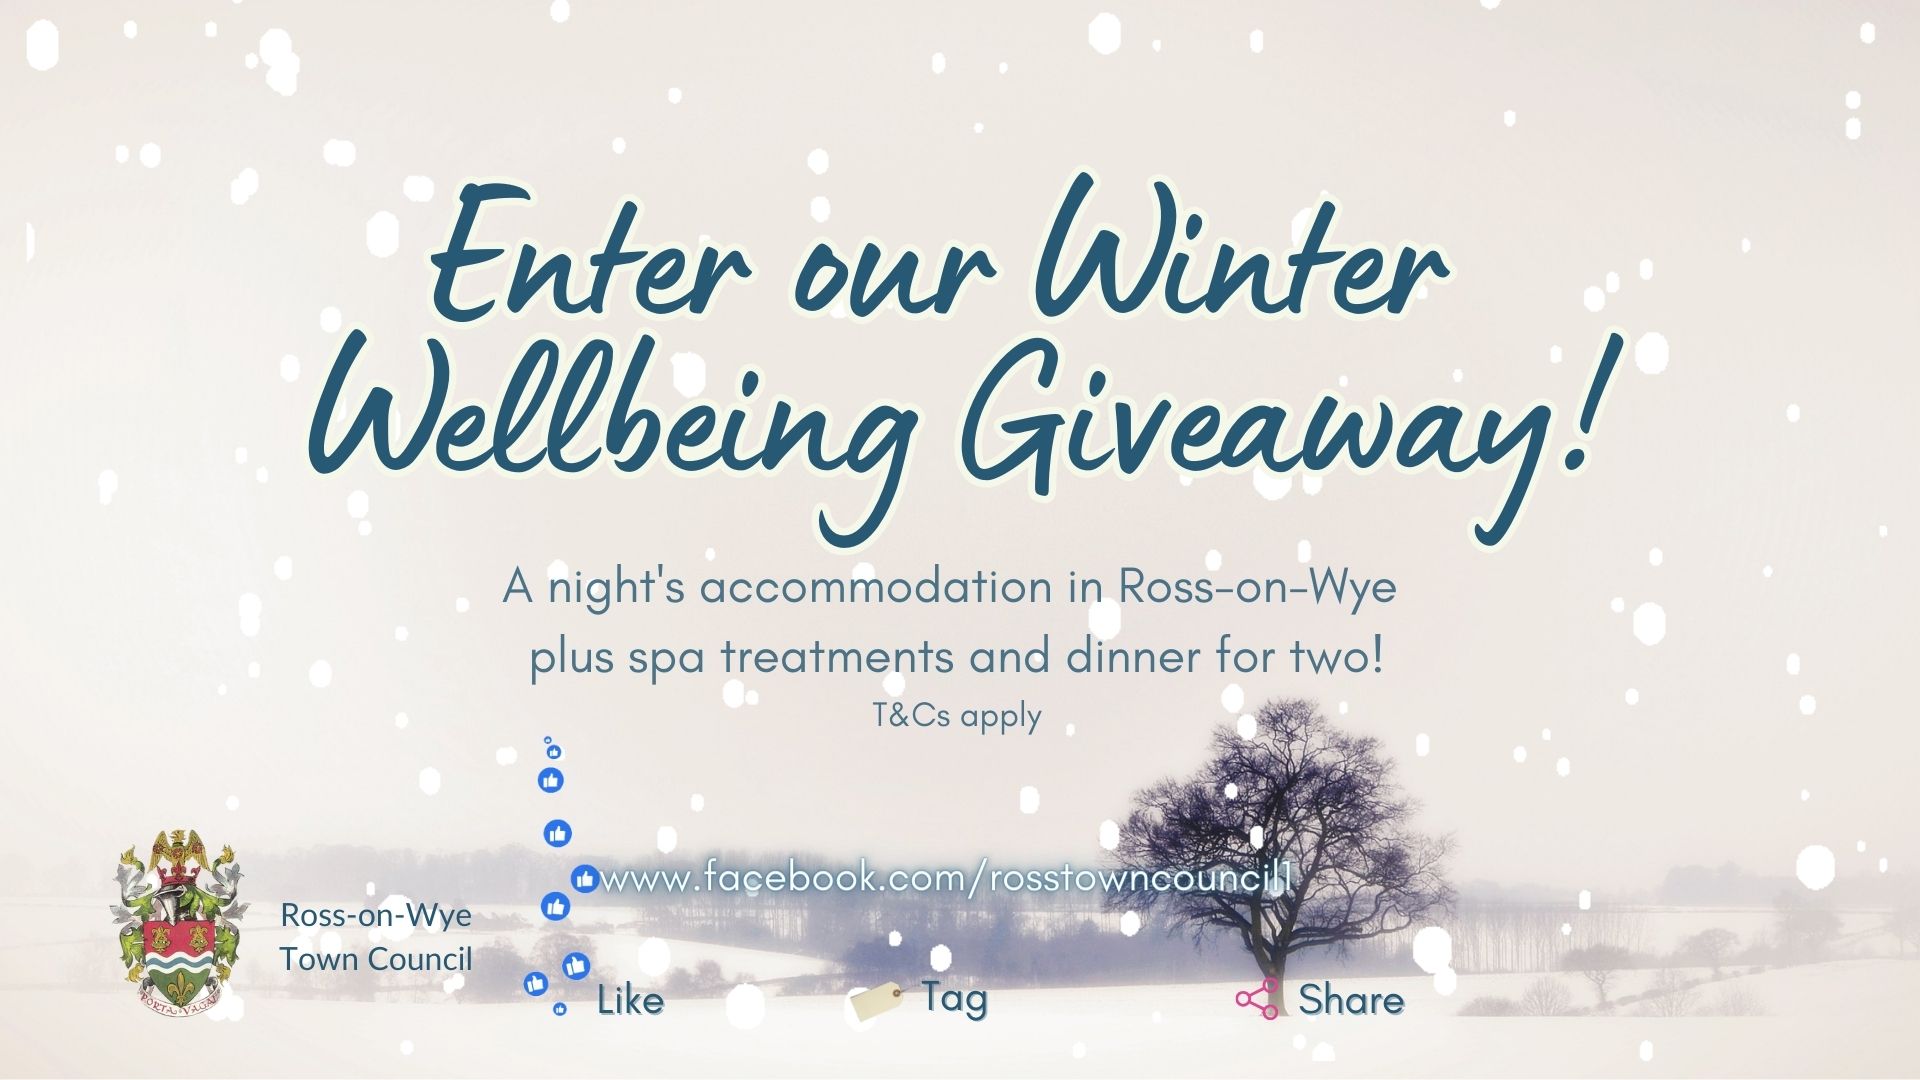 Winter Wellbeing Giveaway - one night's accommodation plus lunch or dinner and spa treatments for two people